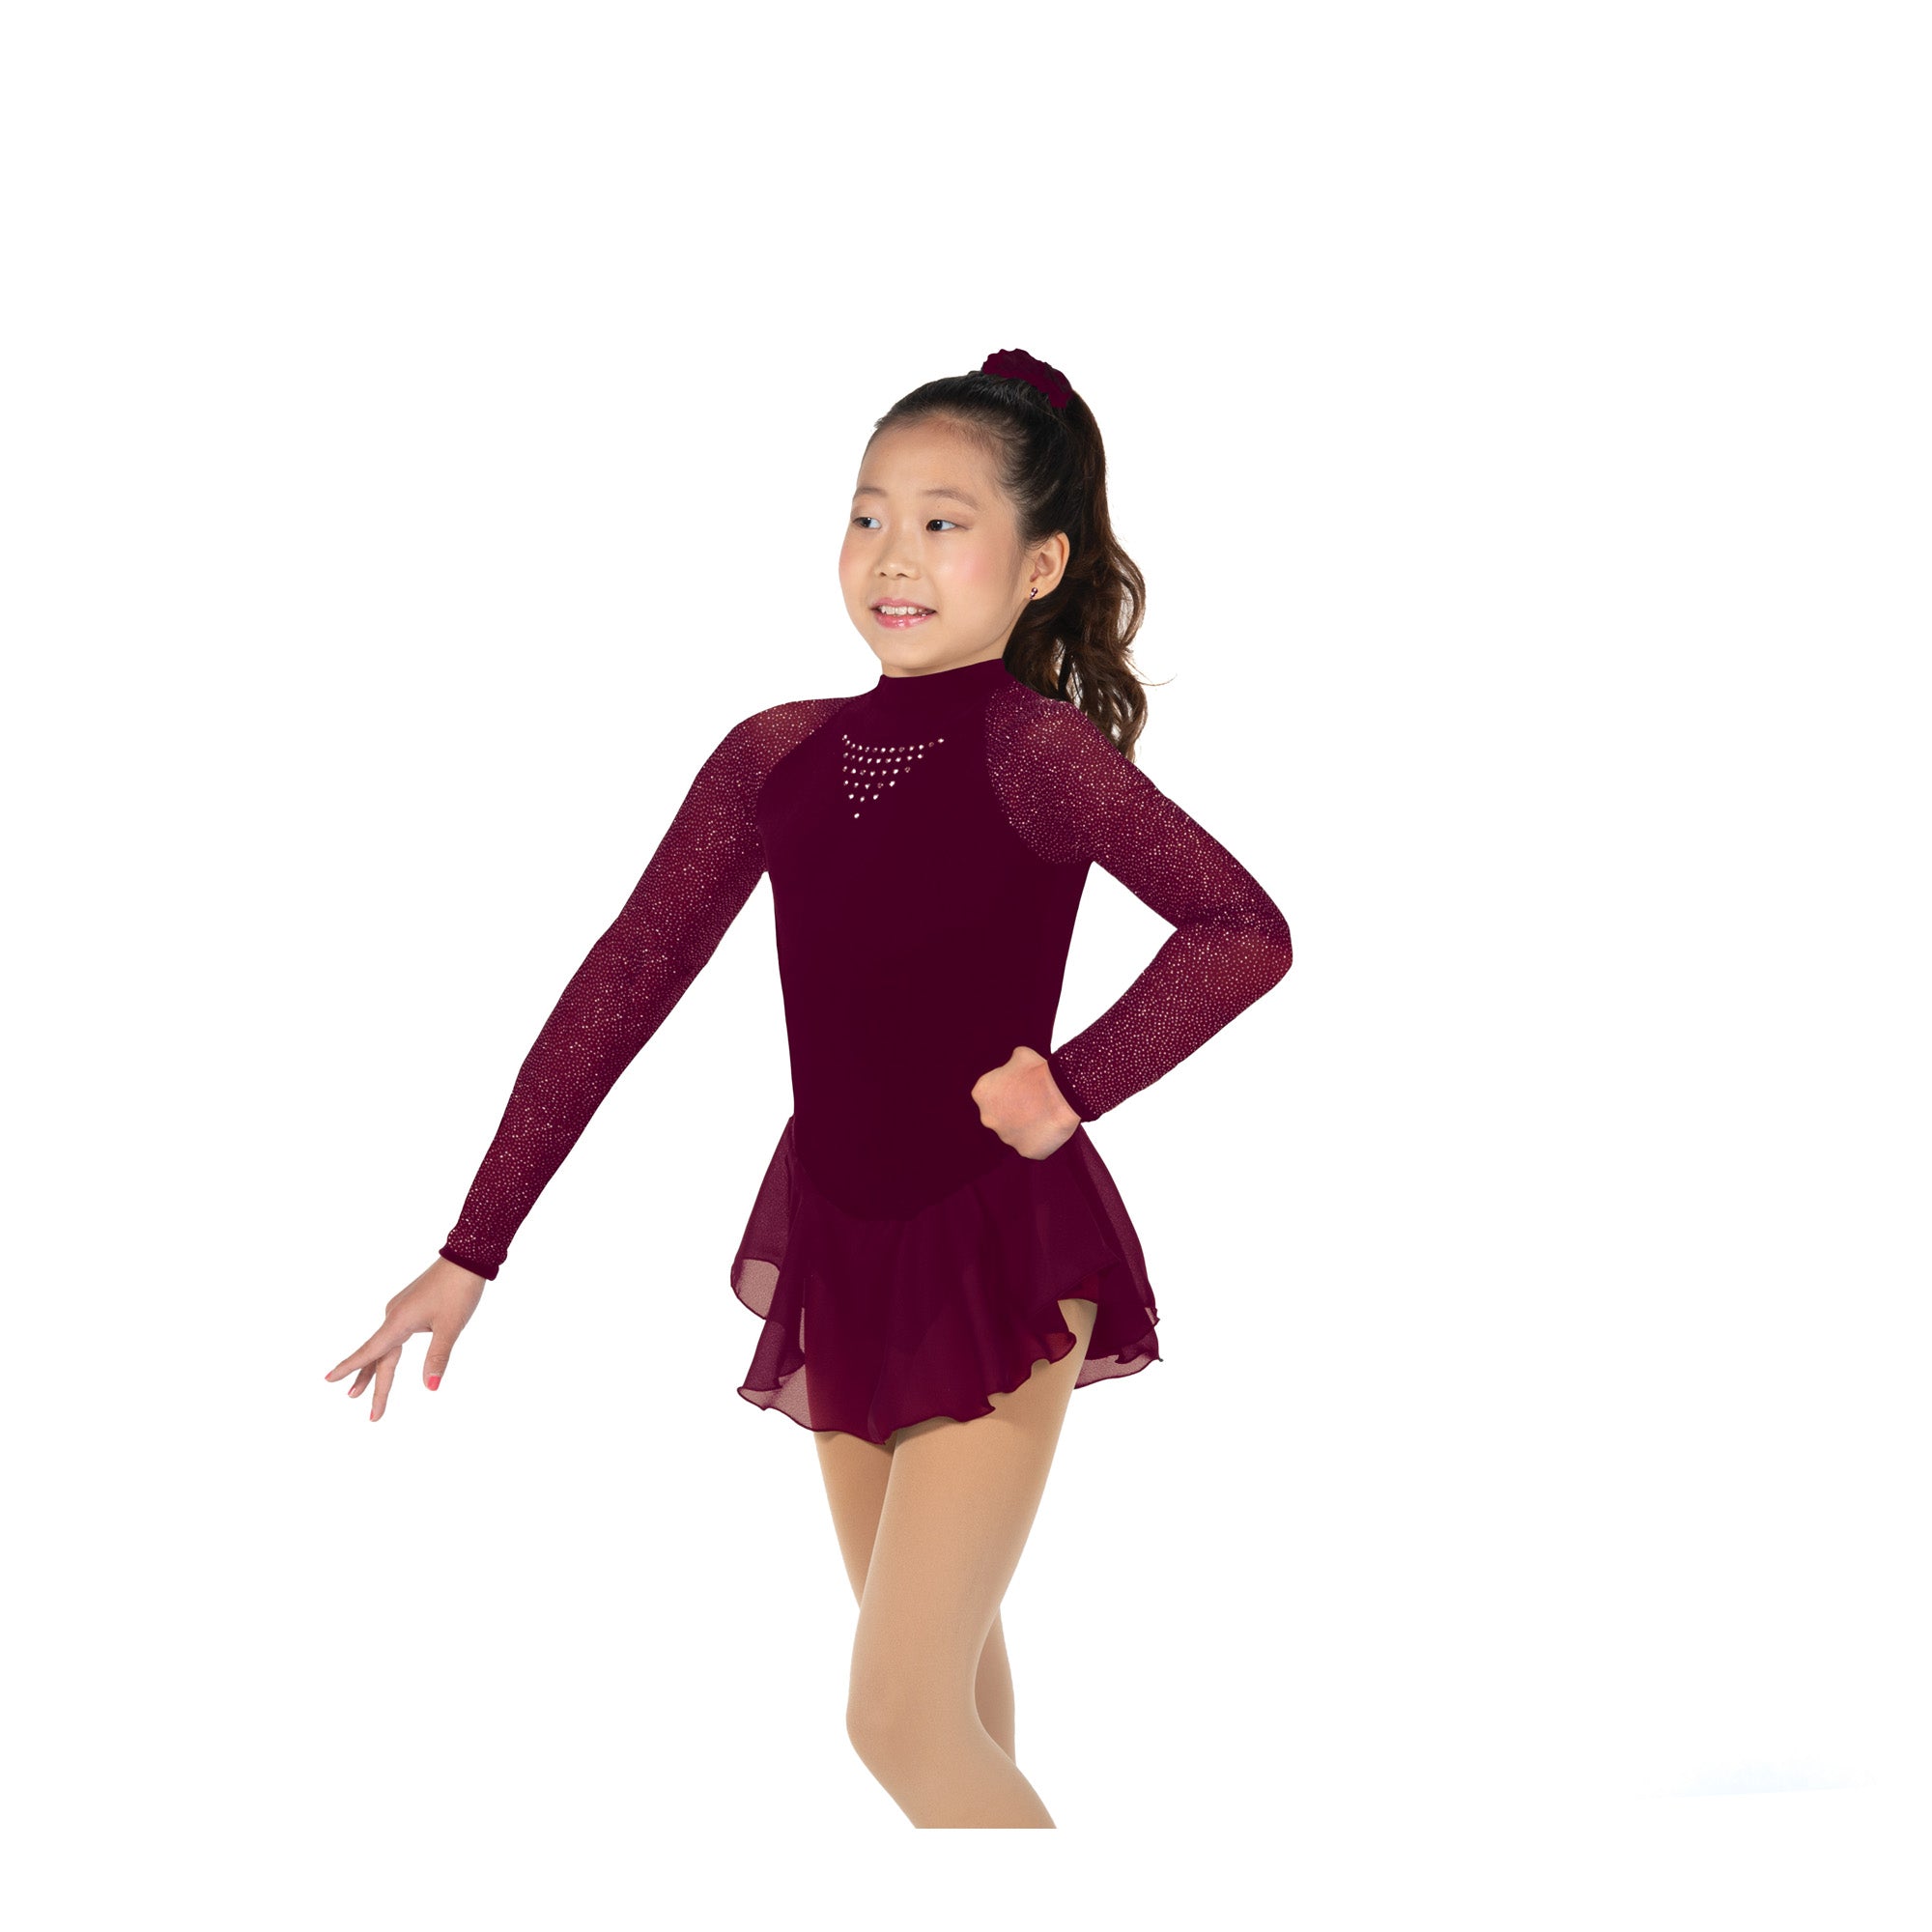 189 Starbrite Skating Dress in Burgundy by Jerry's